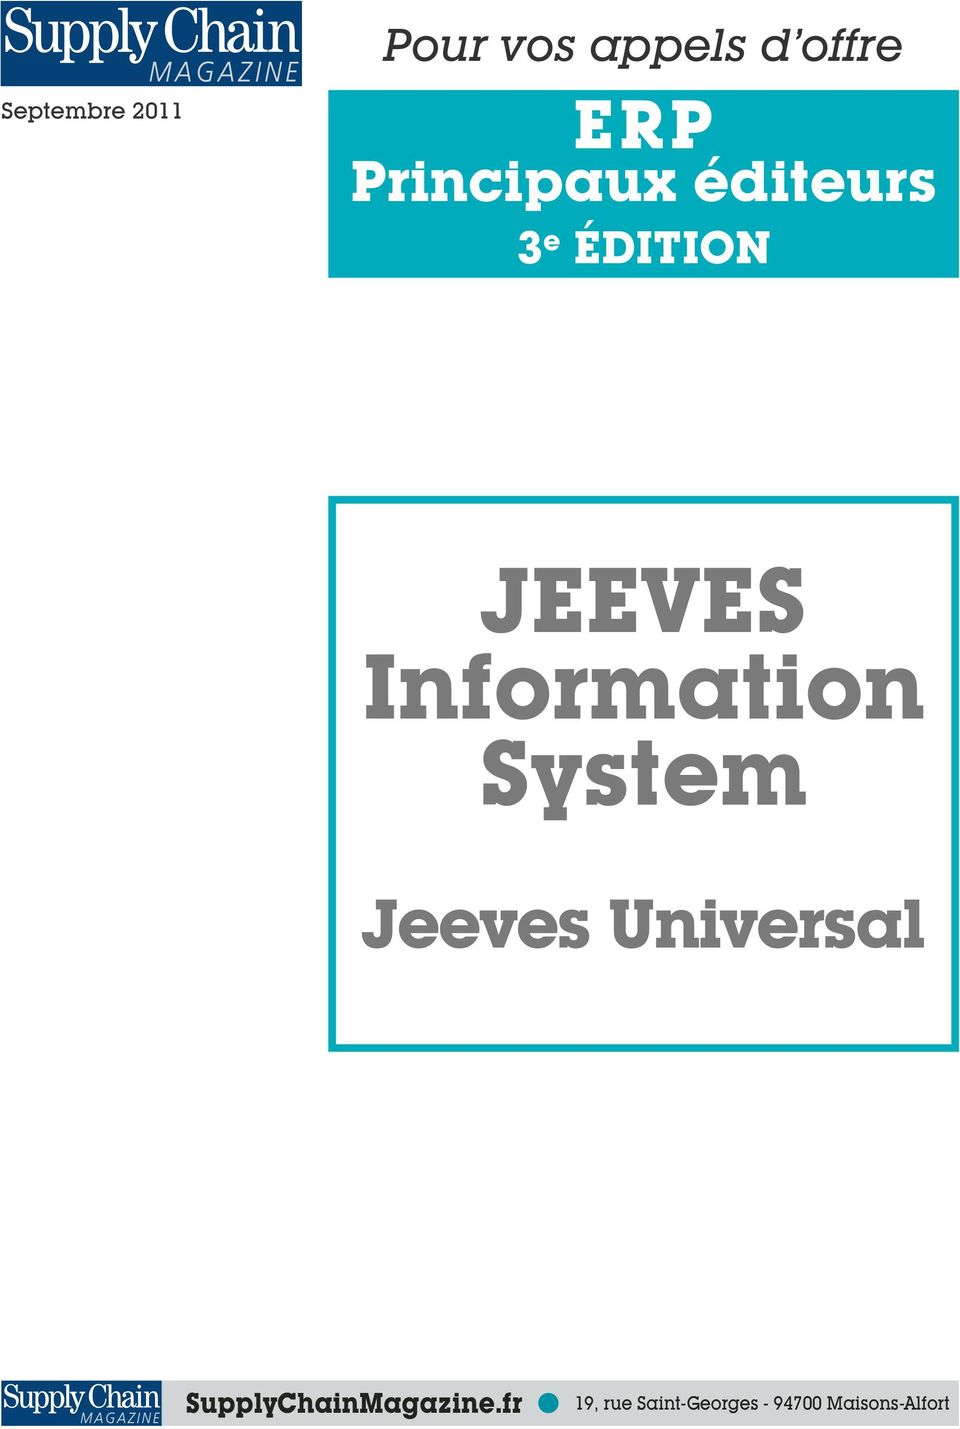 Information System Jeeves Universal